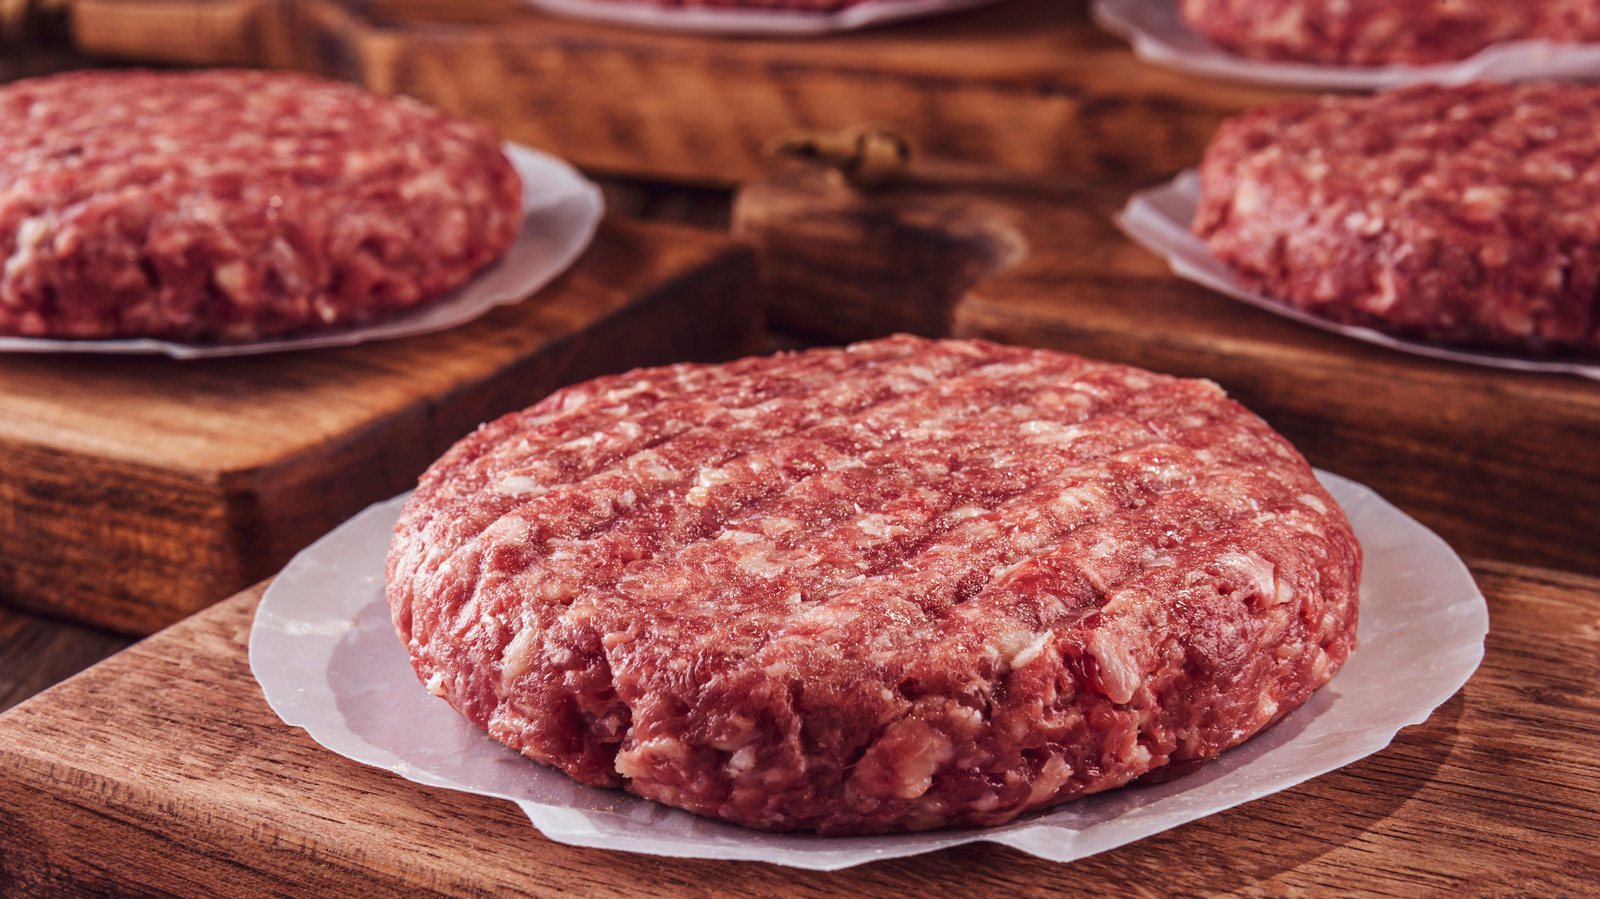 https://www.tastingtable.com/img/gallery/the-kitchen-appliance-to-use-for-grinding-burger-meat-at-home/l-intro-1679941284.jpg